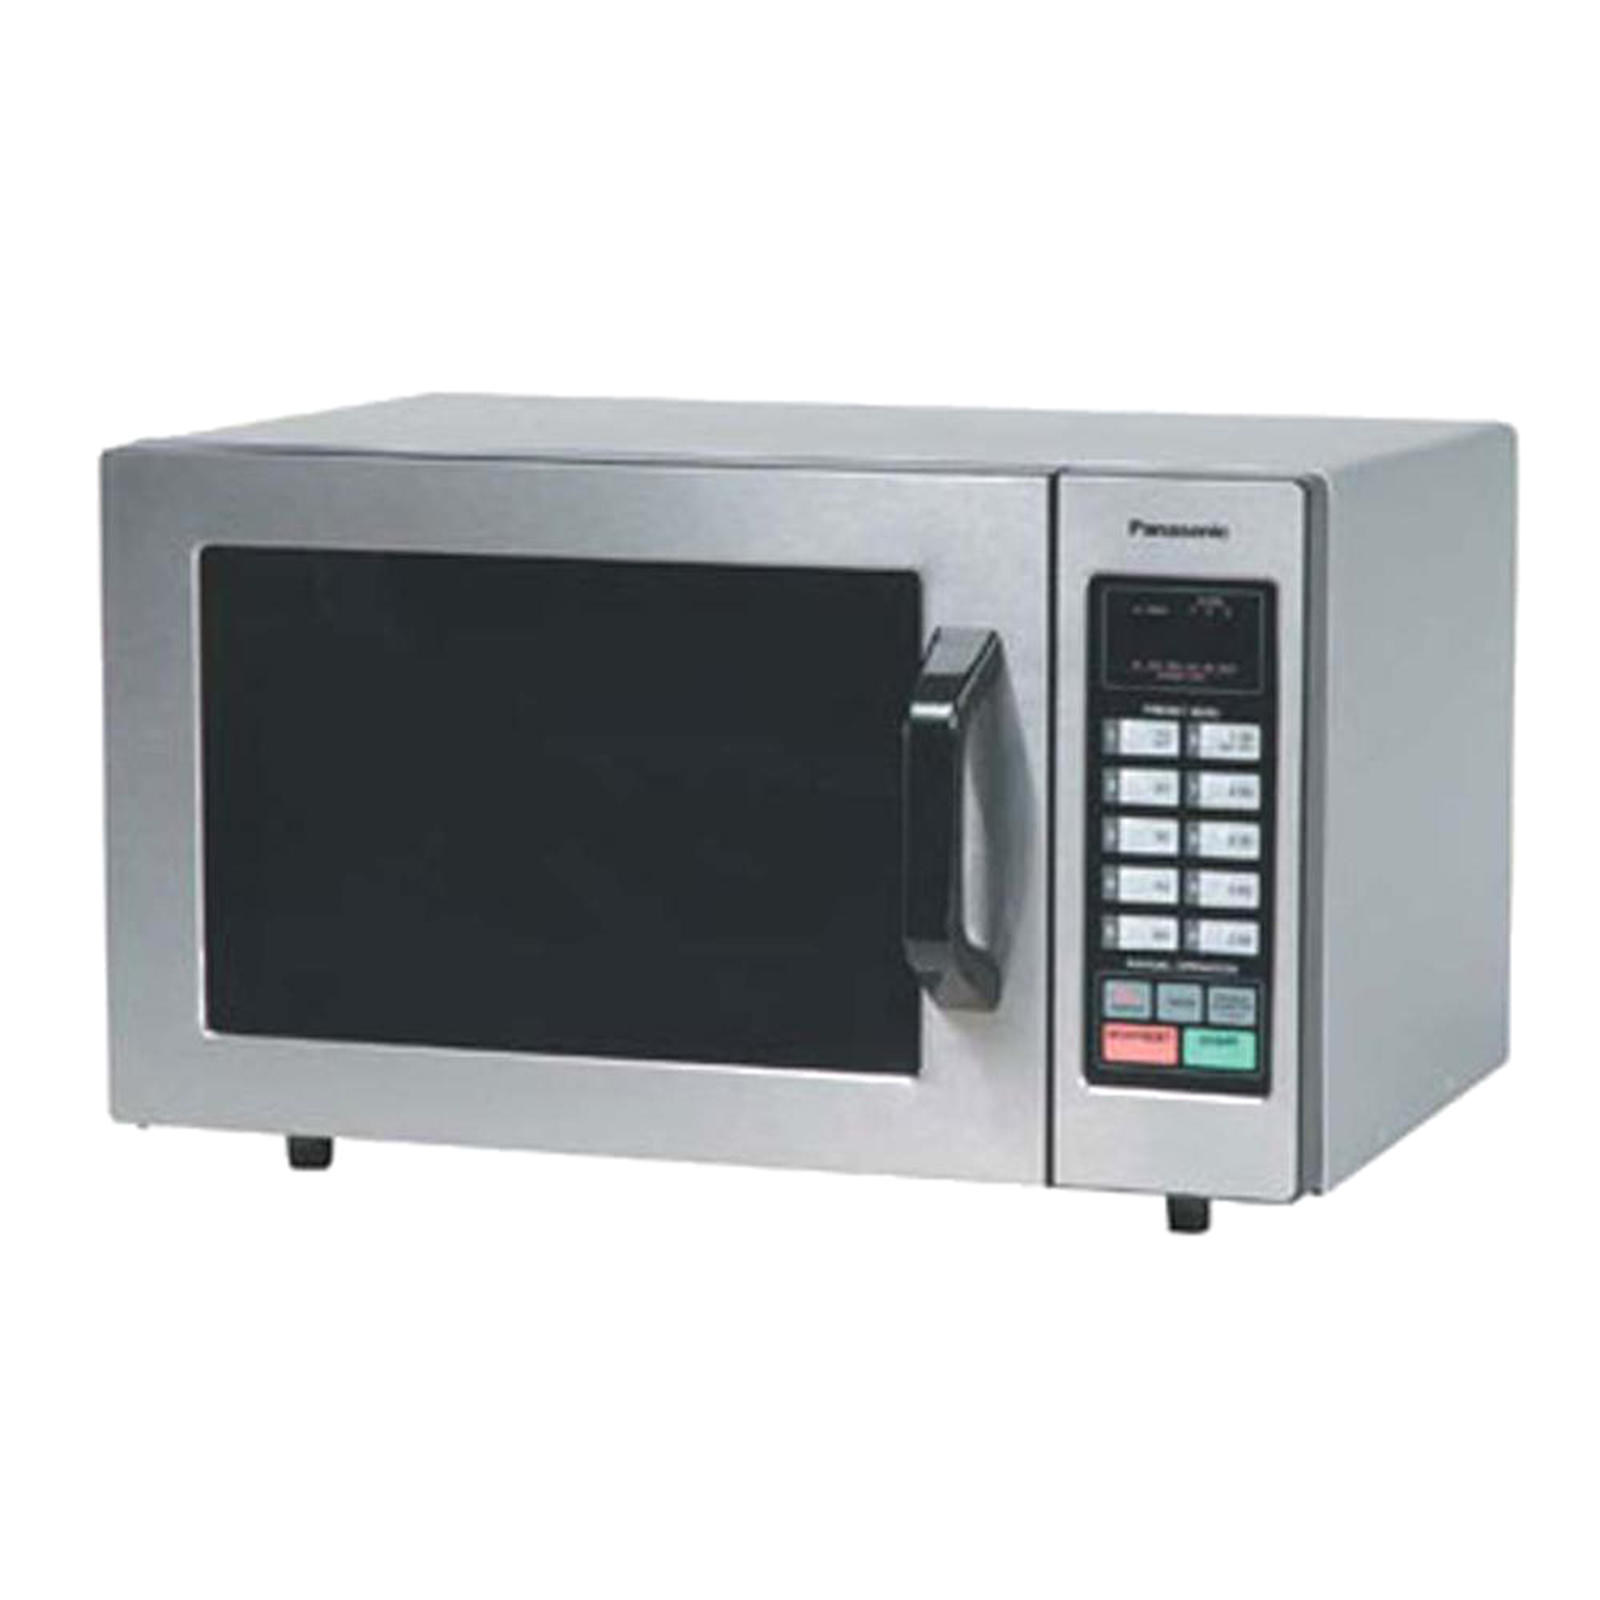 Panasonic NE-1054F  0.8cu.ft. Stainless Steel Commercial Microwave Oven with 6 Power Levels